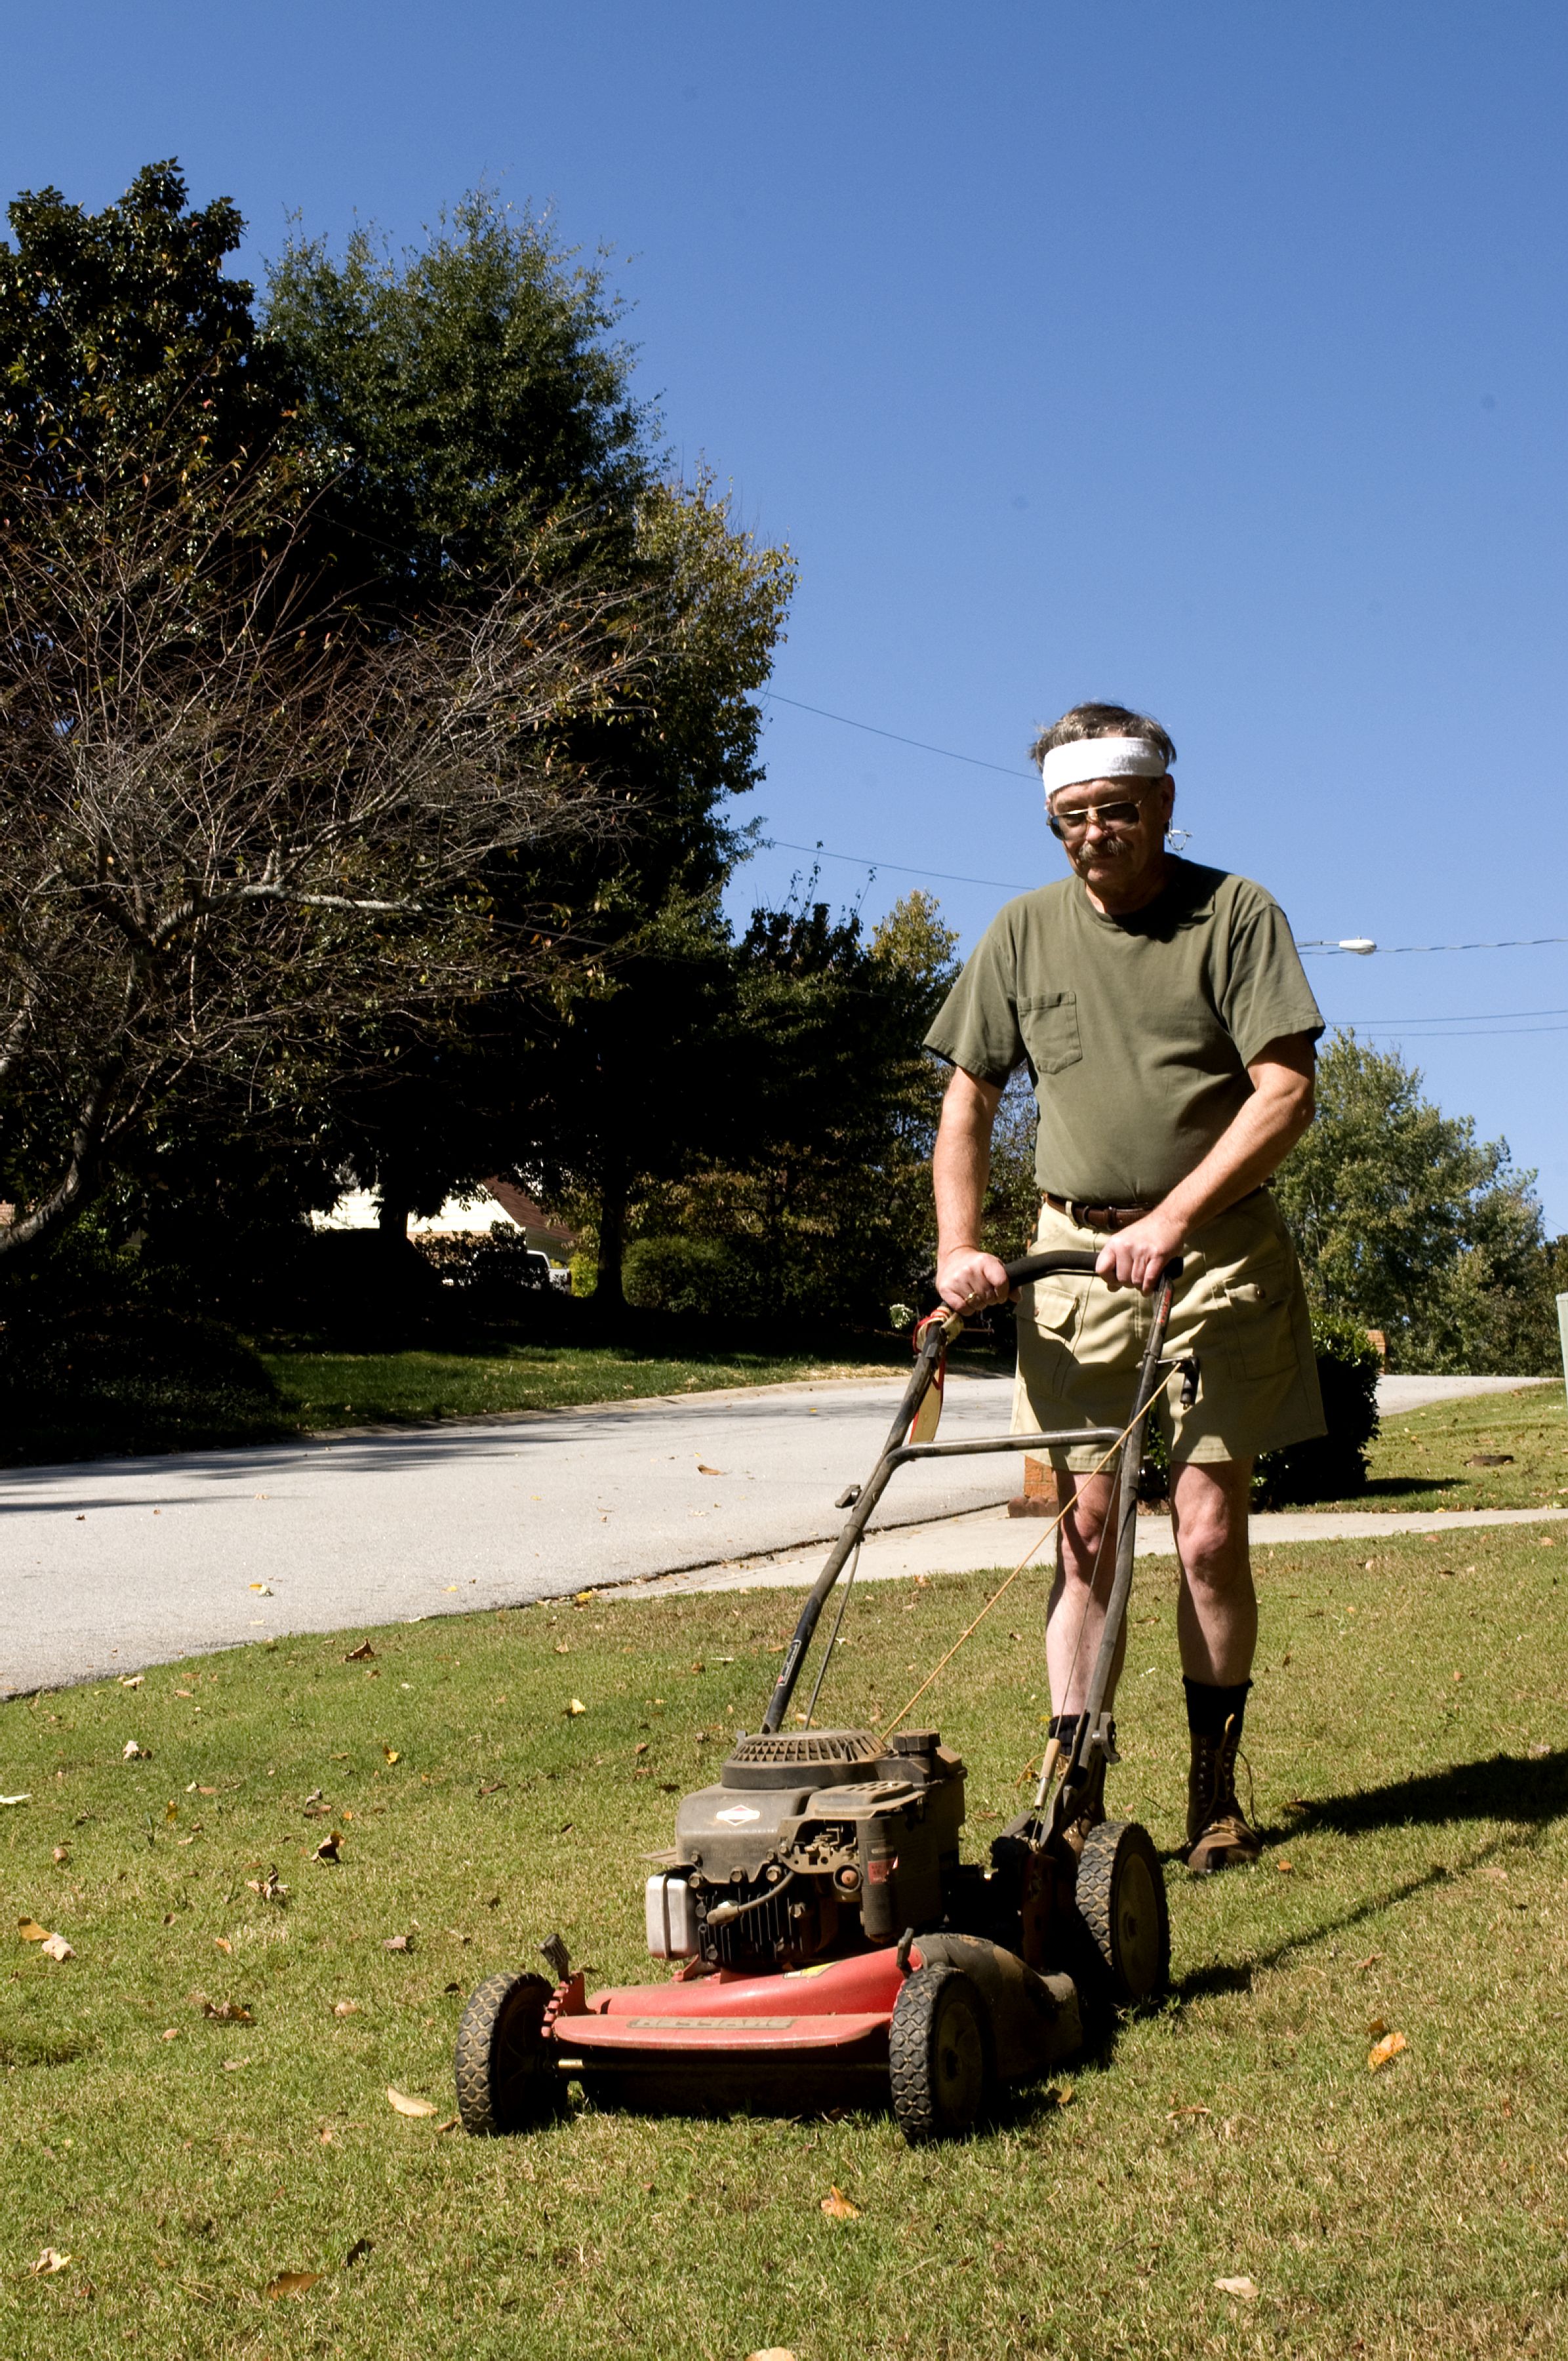 Man was pictured mowing his front lawn with a push lawnmower